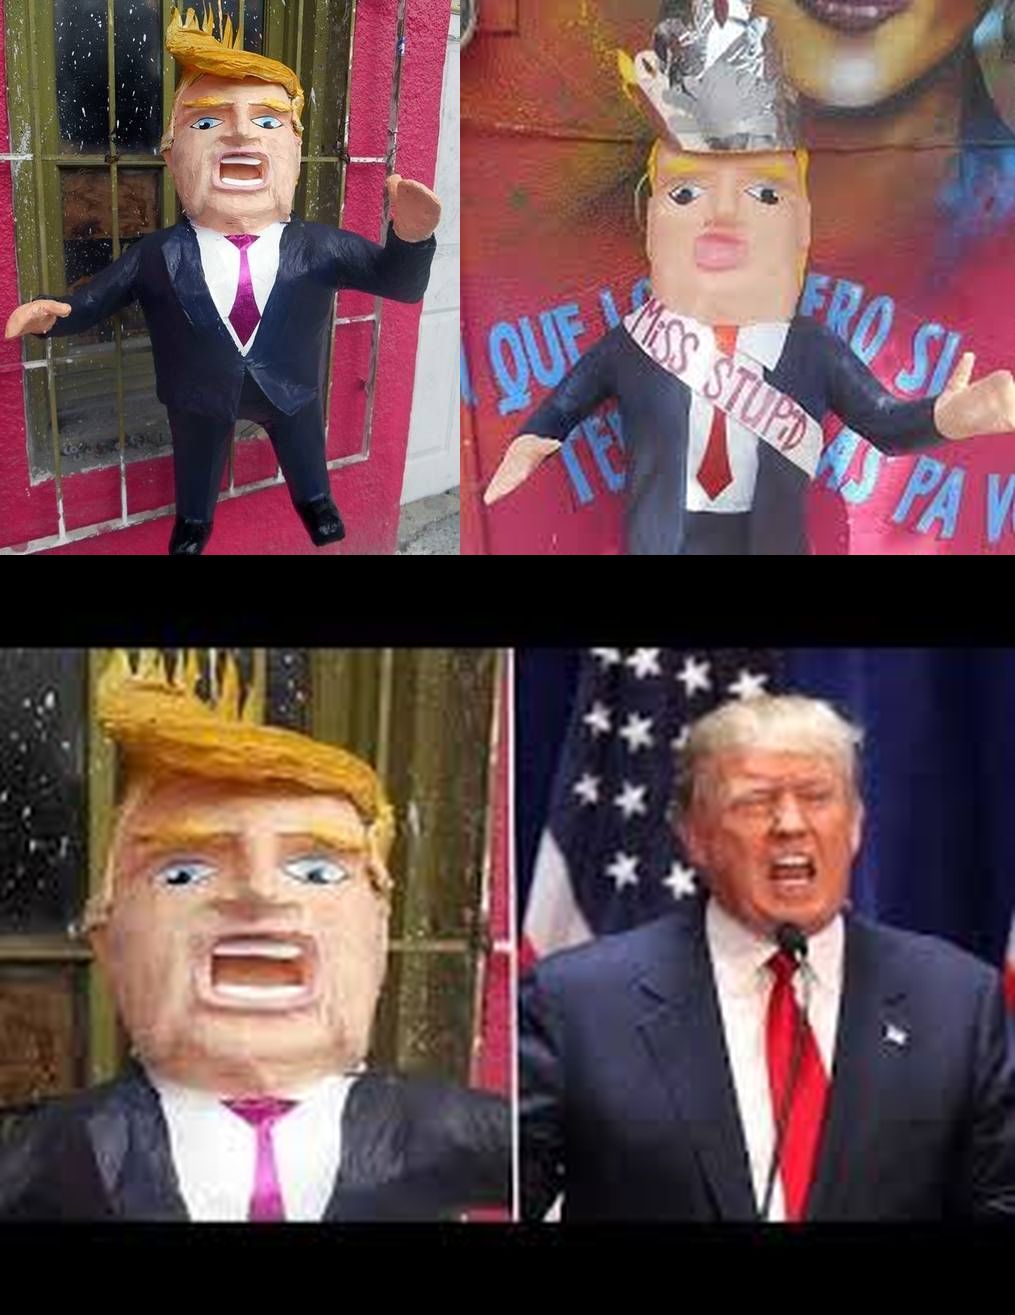 Have the best fun beating the crap out of Trump. The candy he promises is not there, only hot air bullshit. Yes the pinata is real. Google 'Trump pinata'. Have fun. Upload your beat to shit pinata for us to see. We need a good laugh.